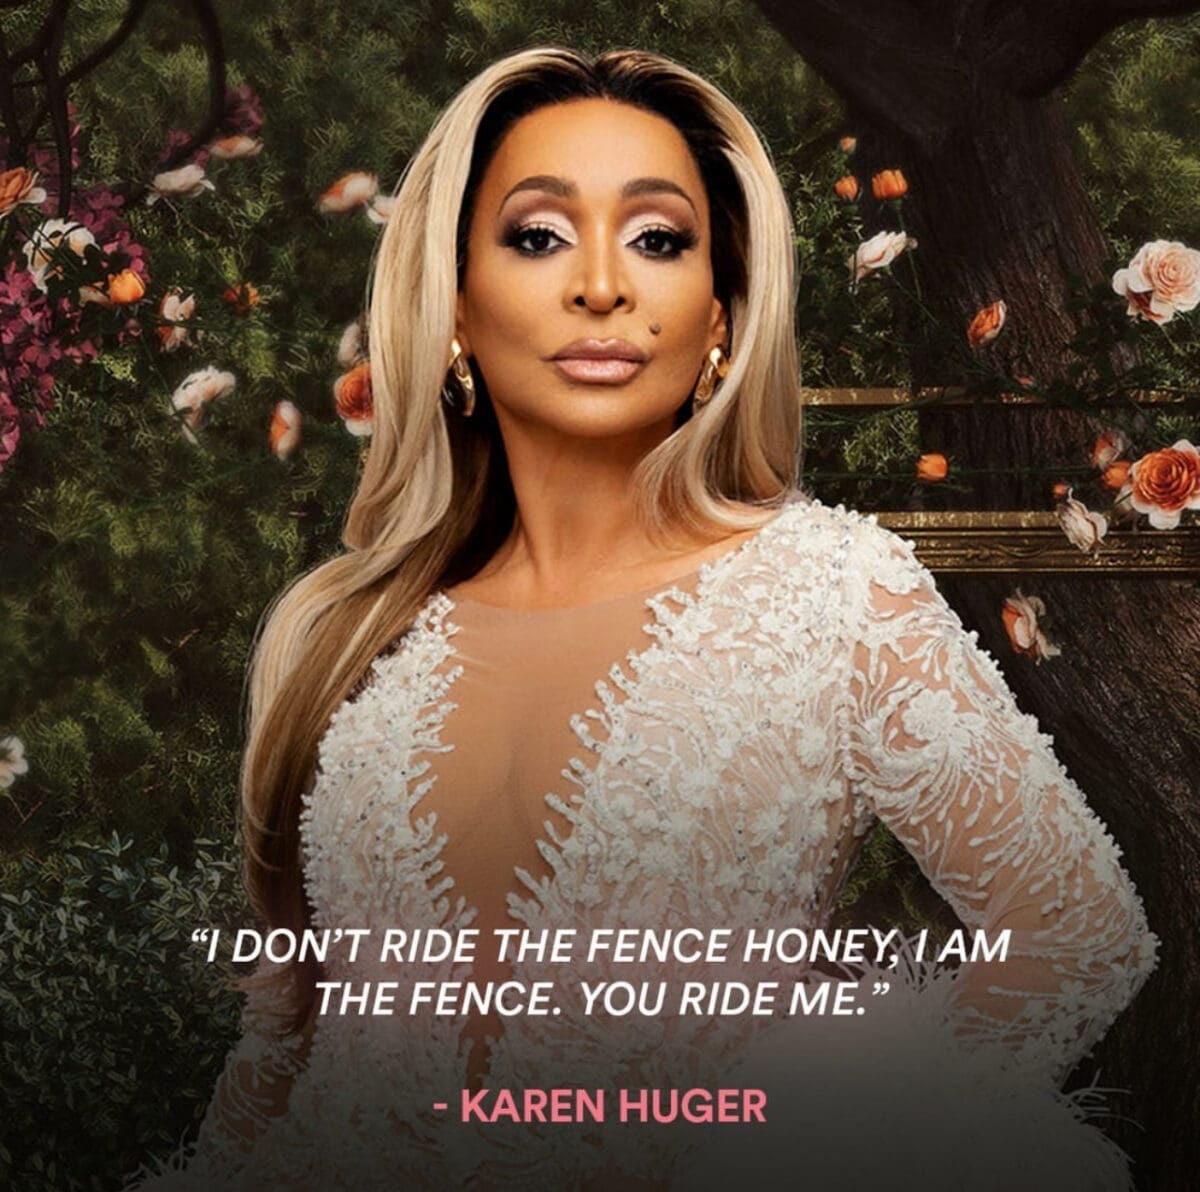 picture of Karen Huger of Real Housewives of potomac and her tagline, I don't ride the fence, I am the fence. You ride me.